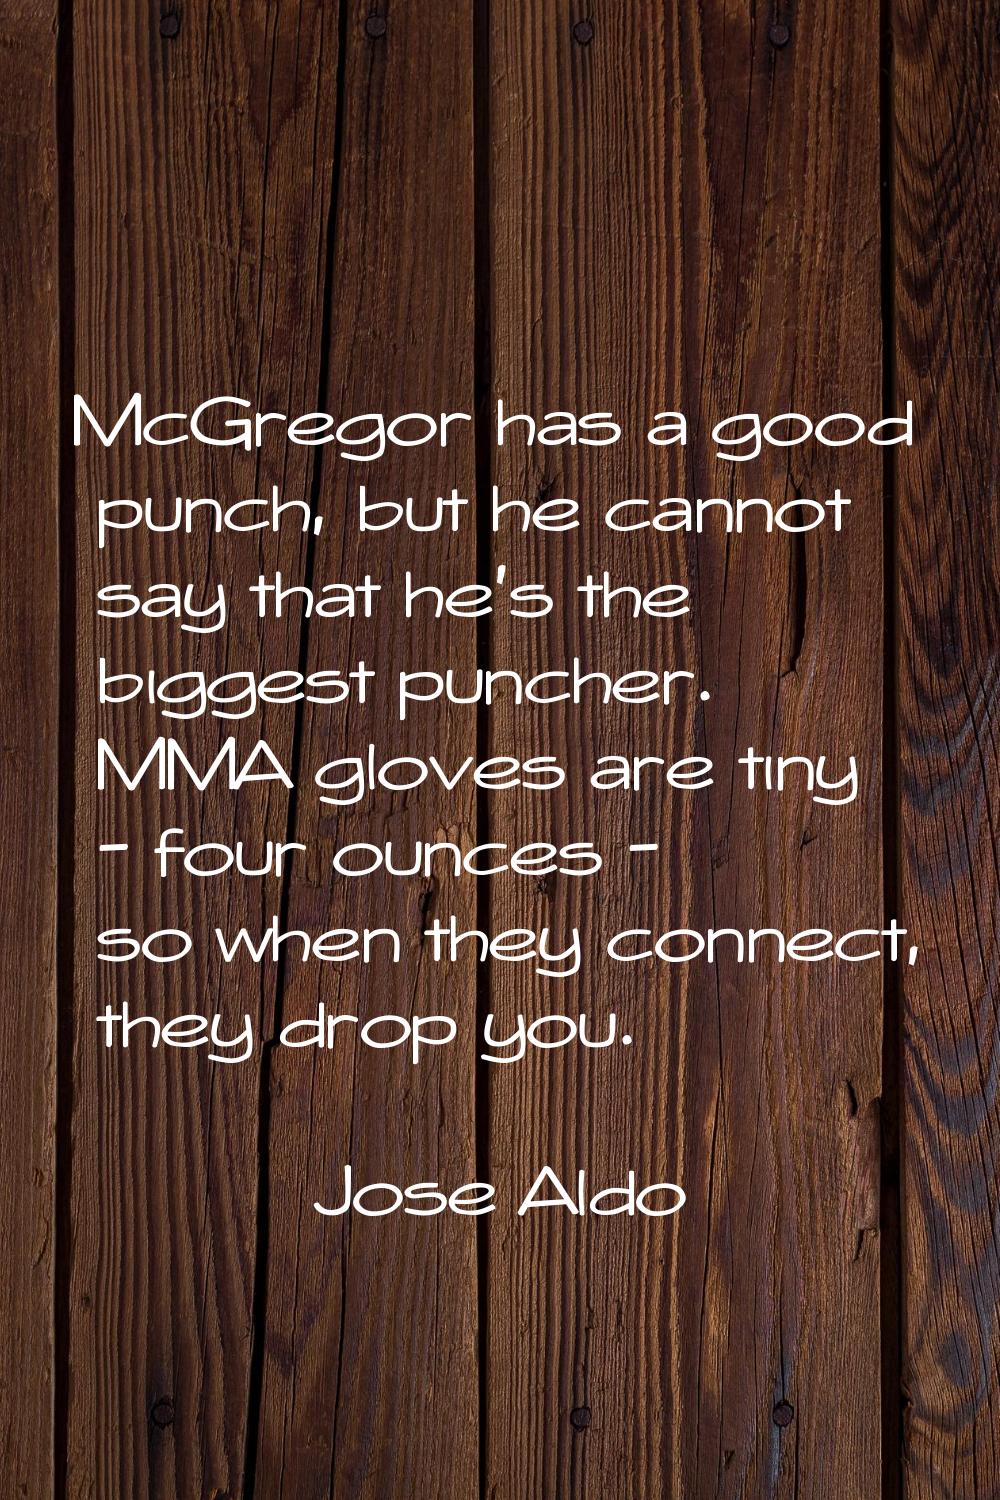 McGregor has a good punch, but he cannot say that he's the biggest puncher. MMA gloves are tiny - f